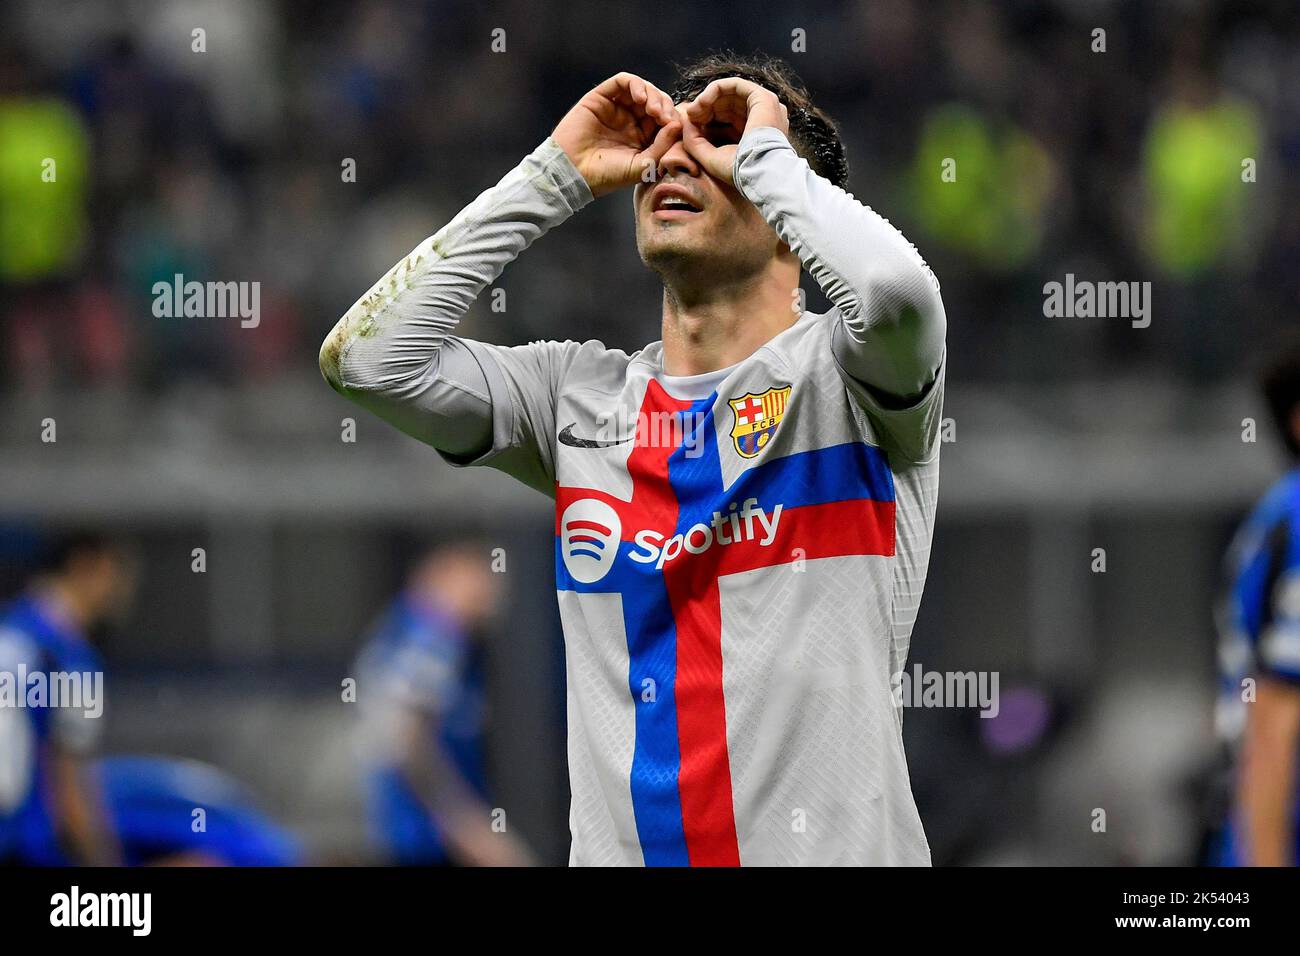 Pedro Gonzalez Lopez aka Pedri of Barcelona celebrates after scoring a goal, overruled by VAR, during the Champions League Group C football match betw Stock Photo